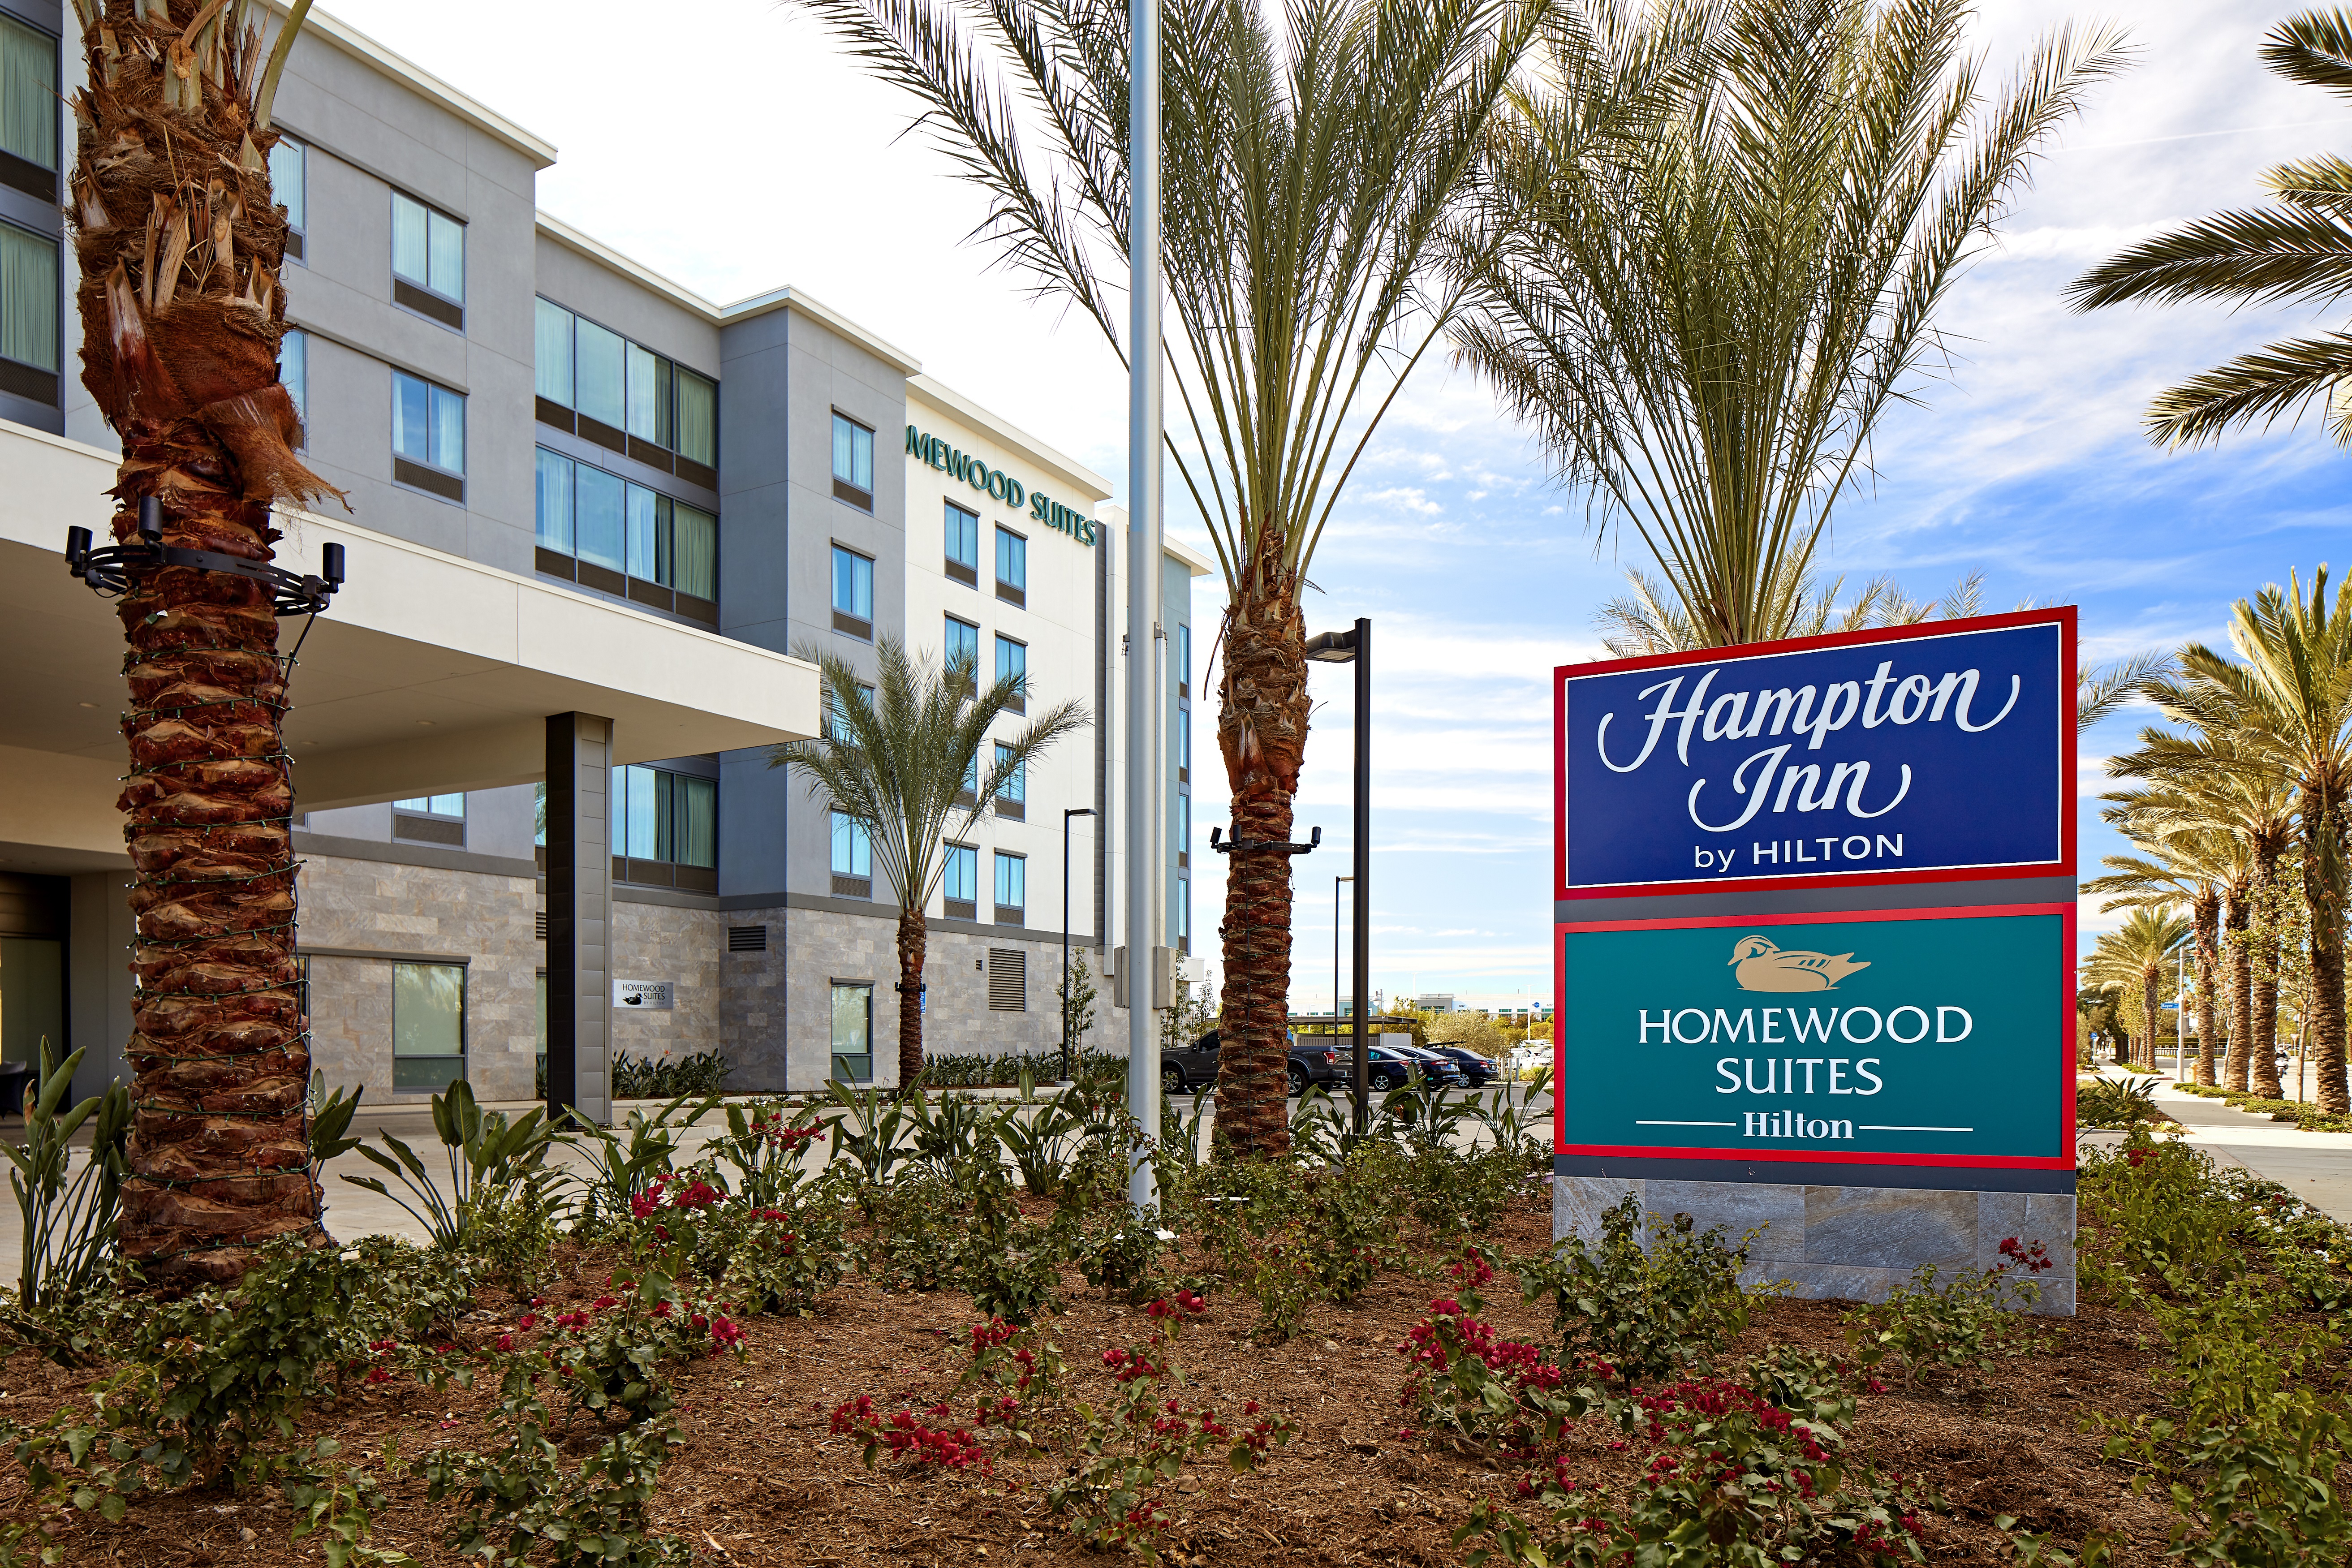 Hotel Building Exterior Front with Hamption Inn and Homewood Suites Signs